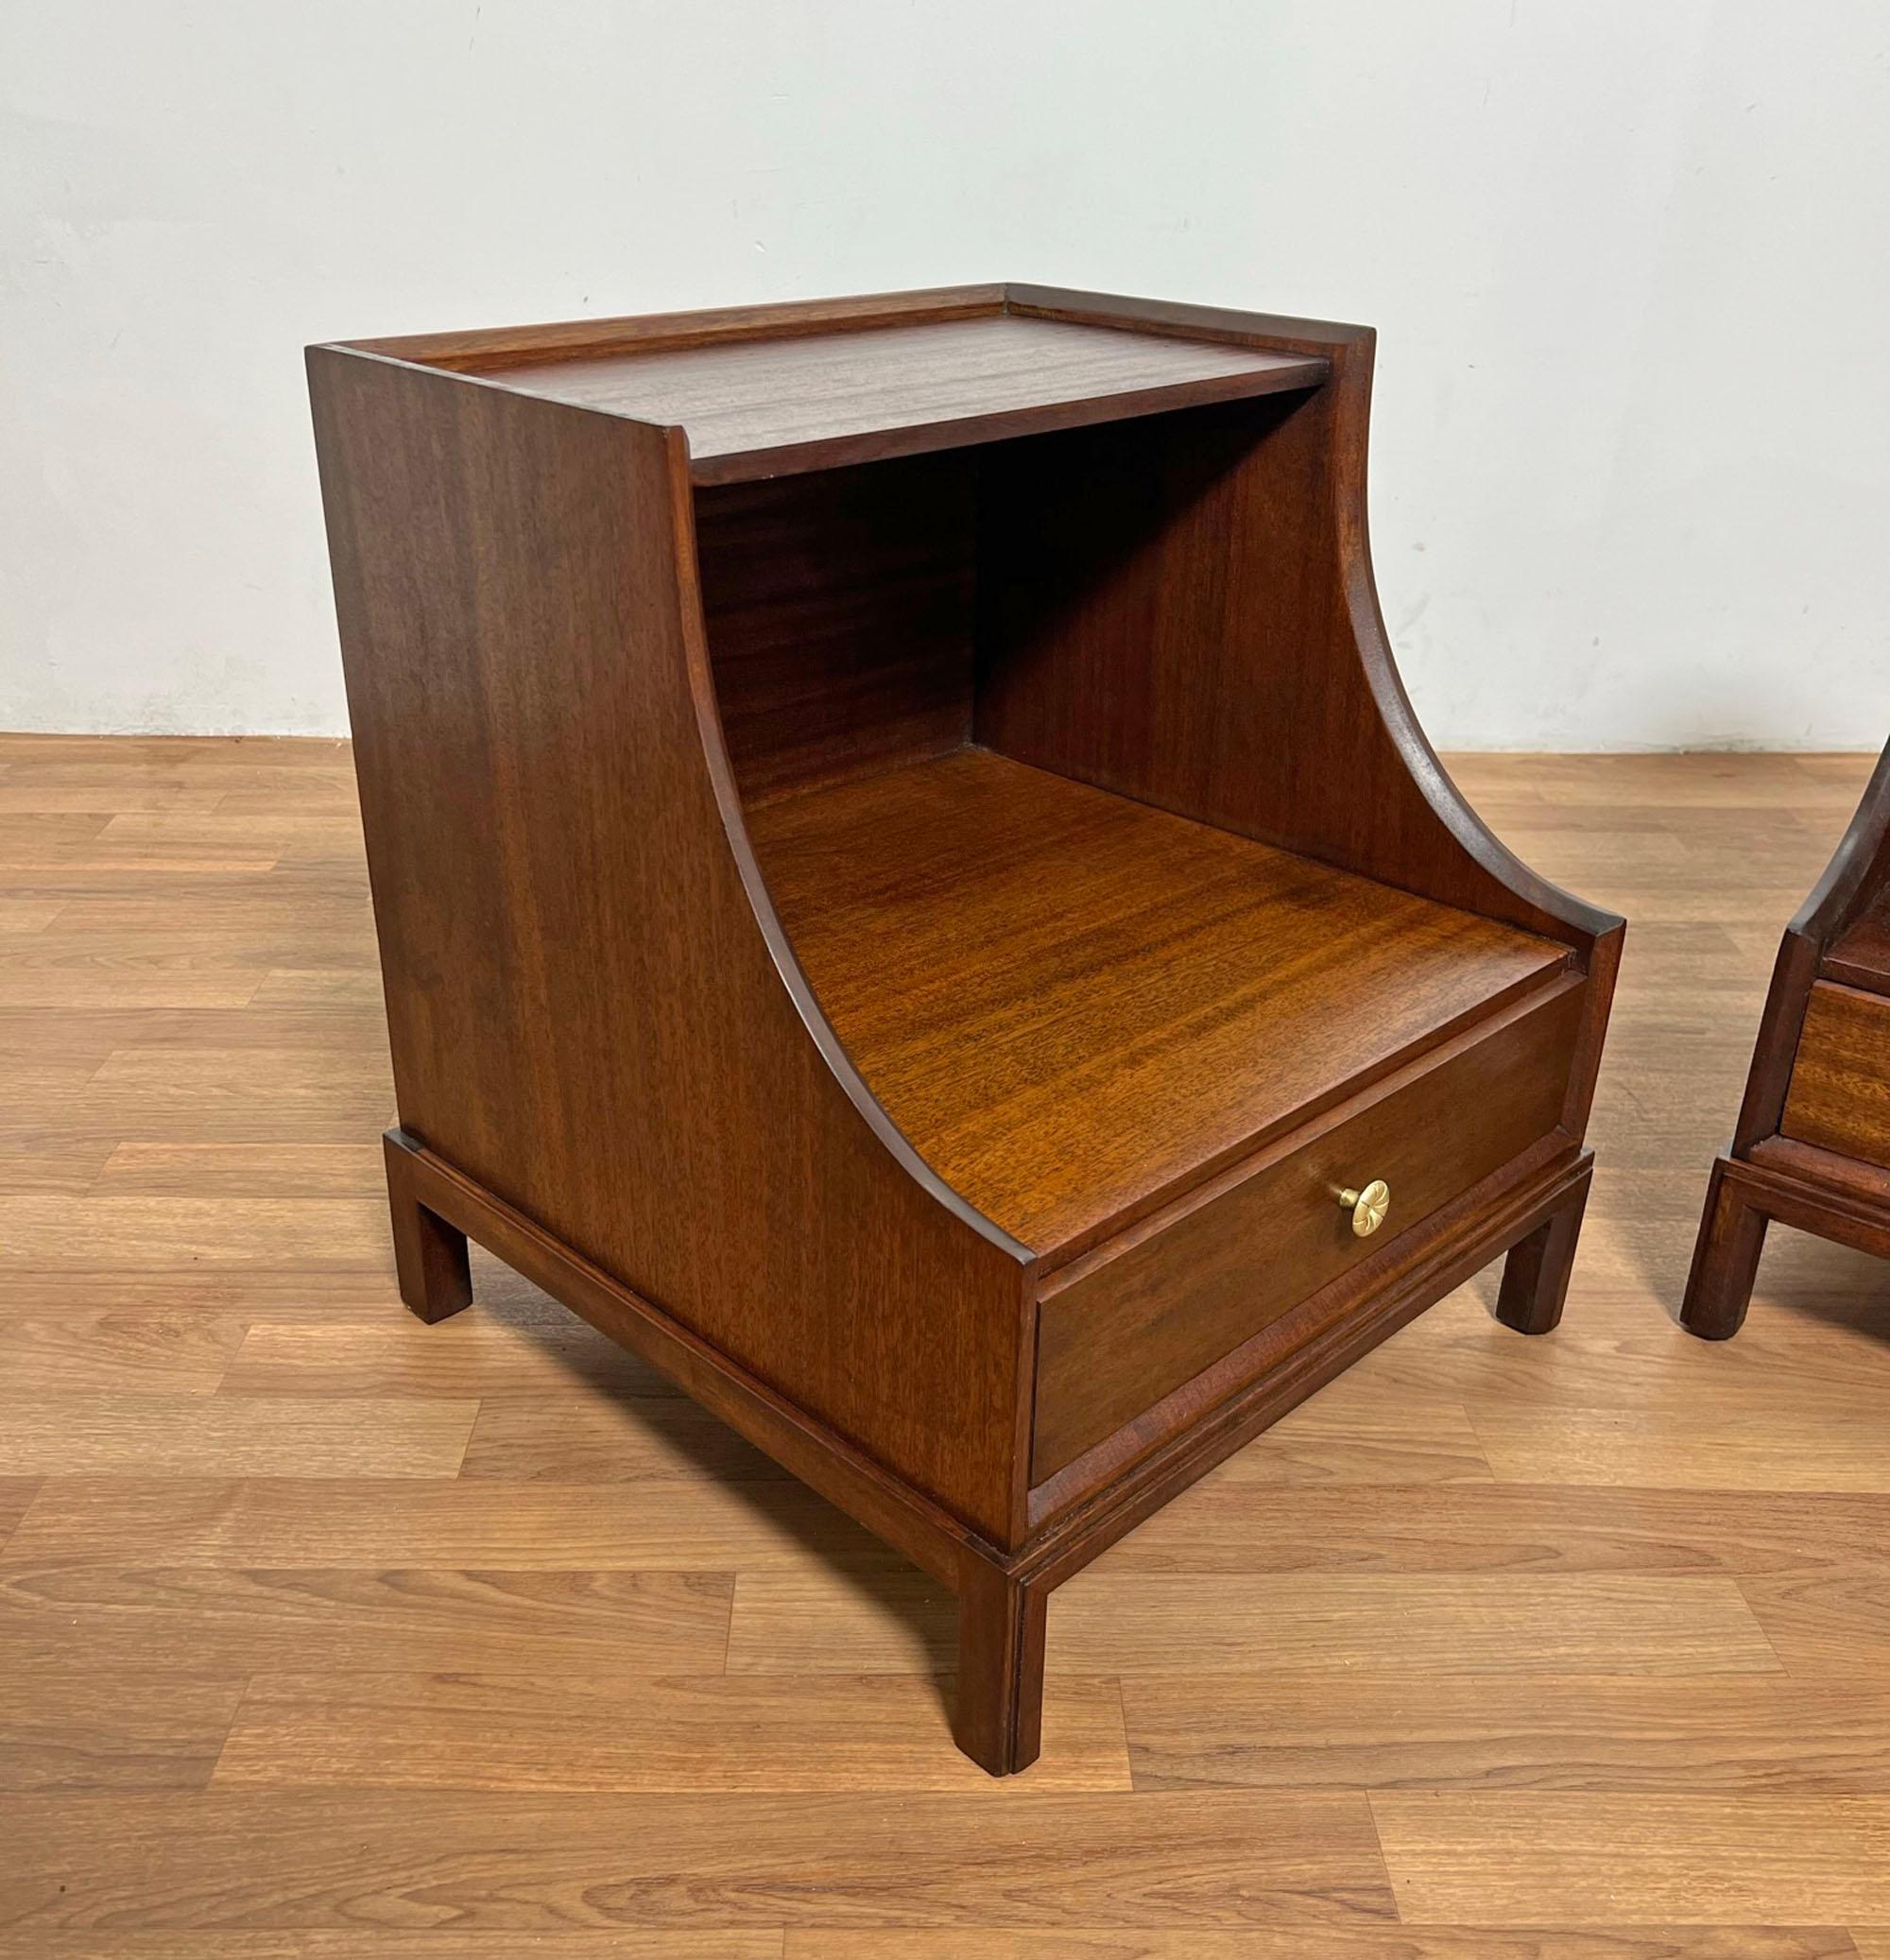 Pair of scoop front nightstands by Tommi Parzinger for Charak Modern, circa 1950s.